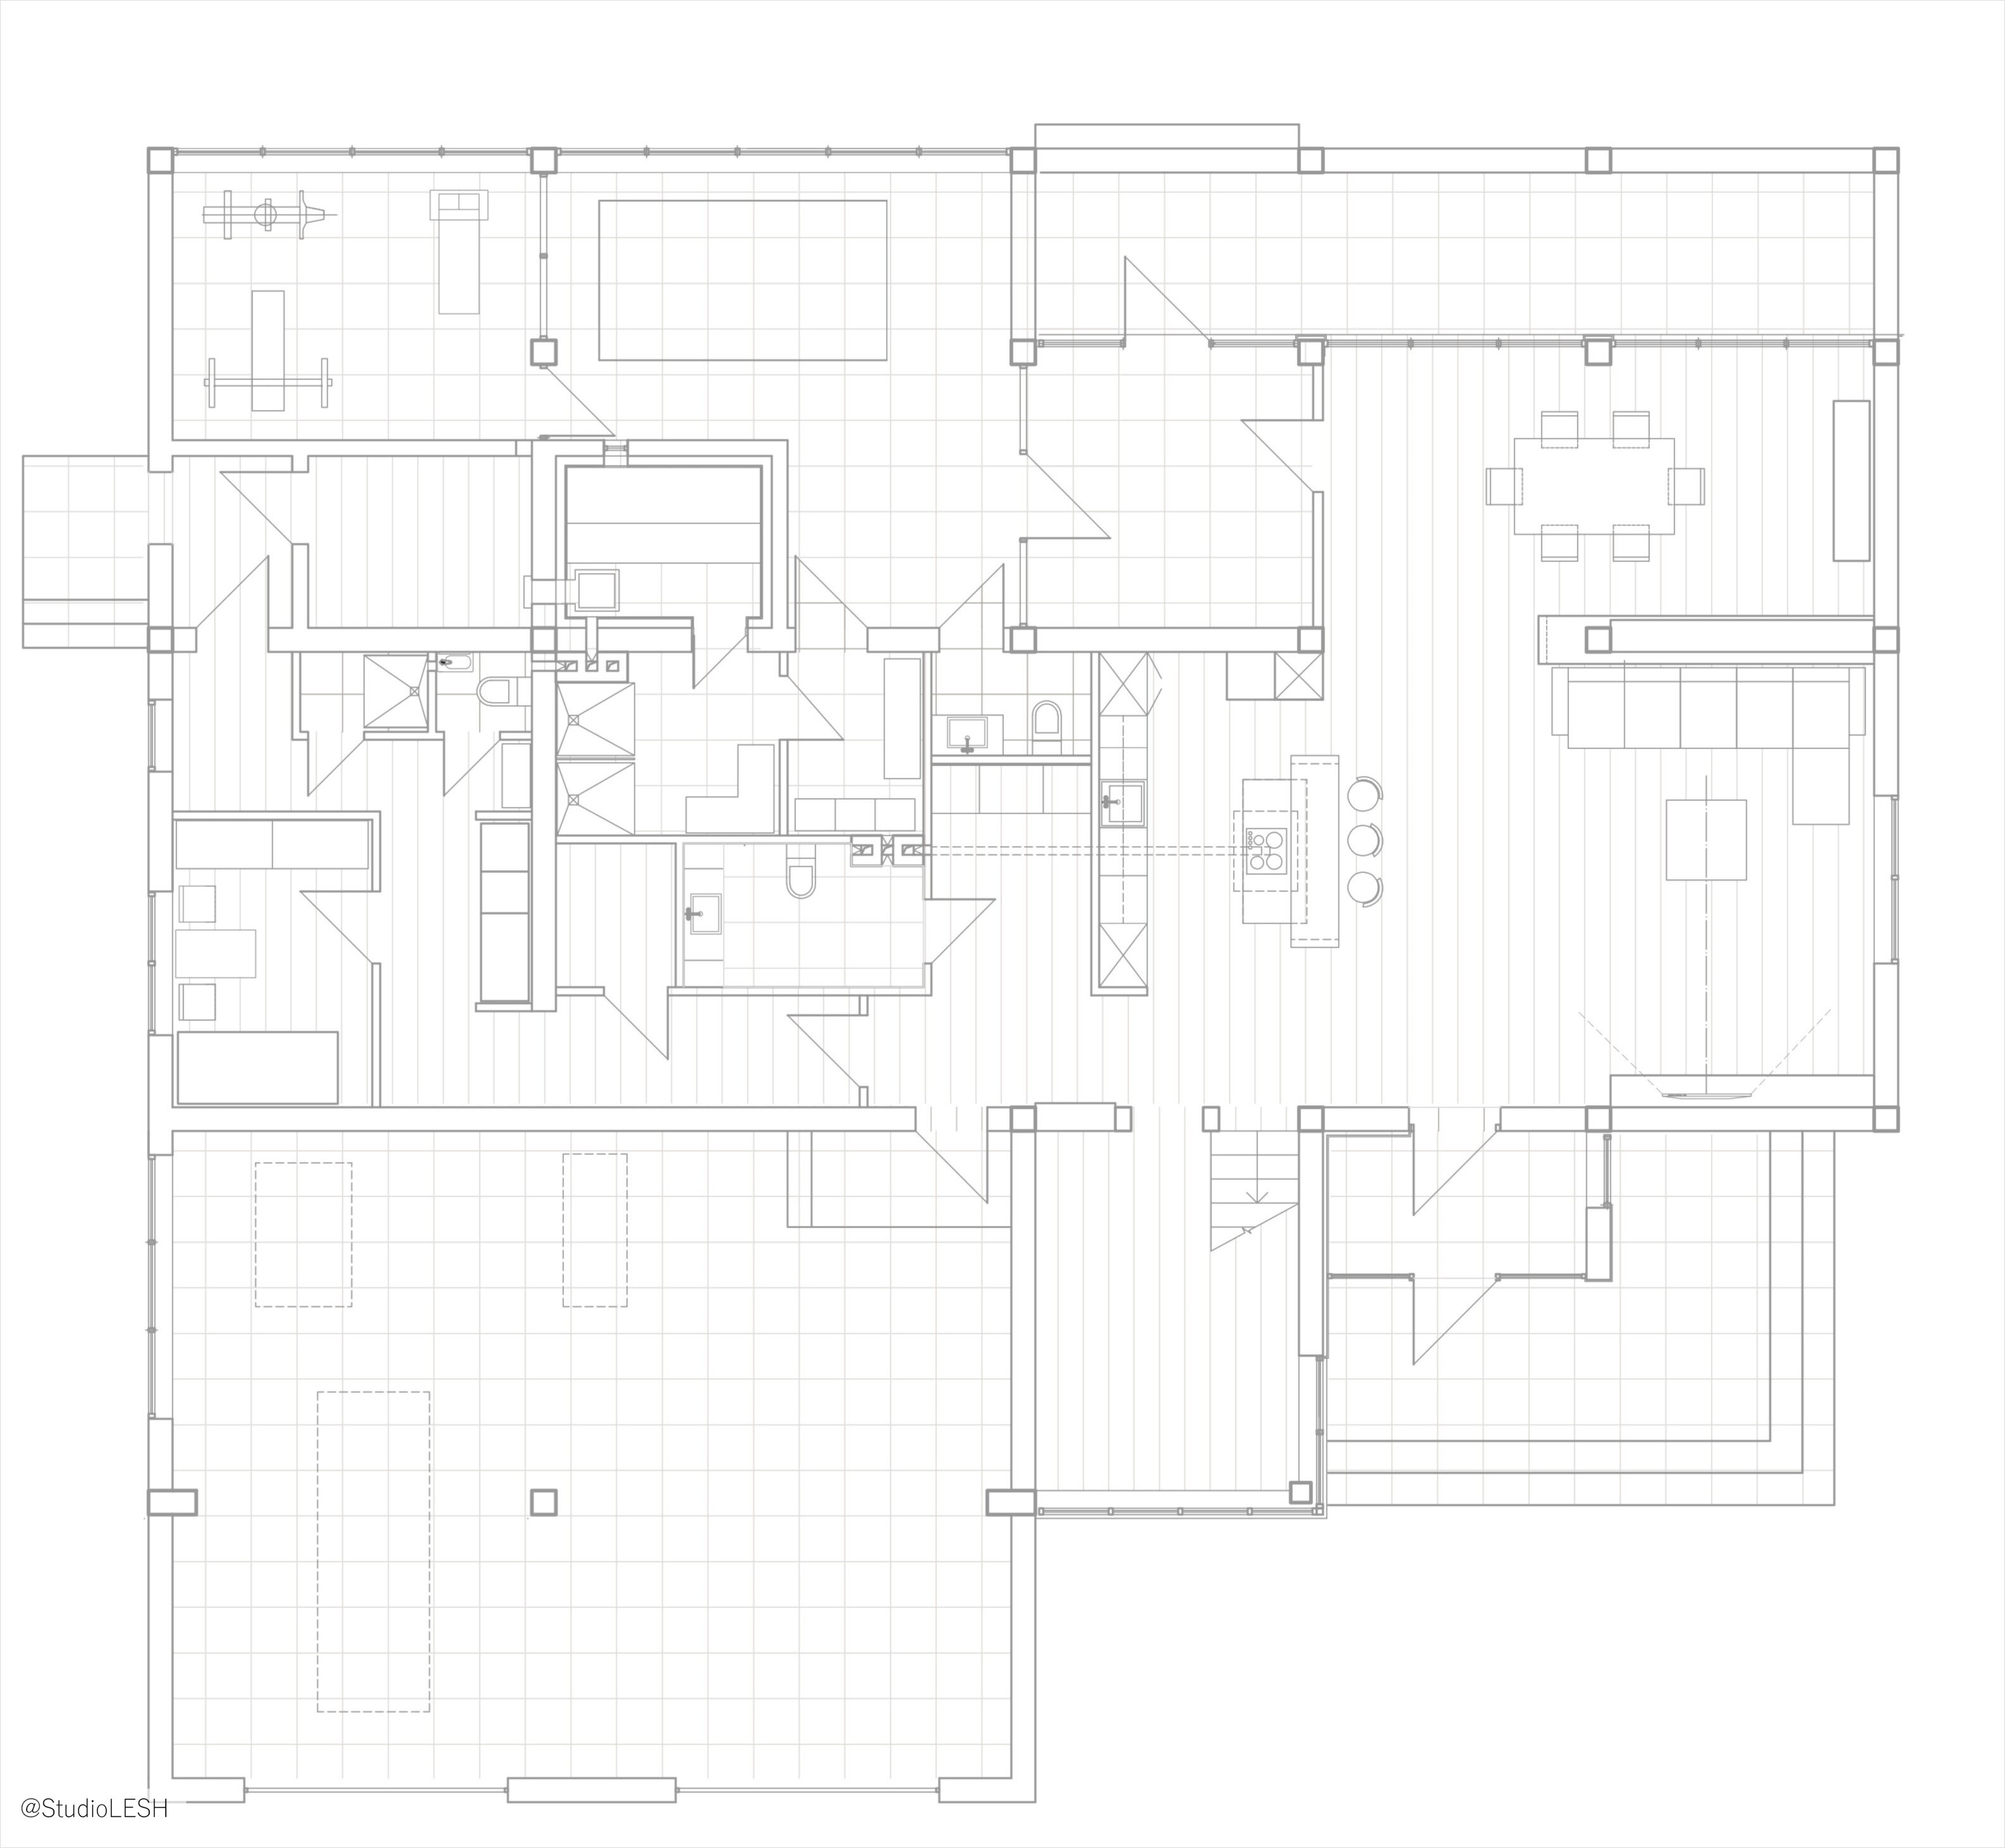 First floor plan of cottage